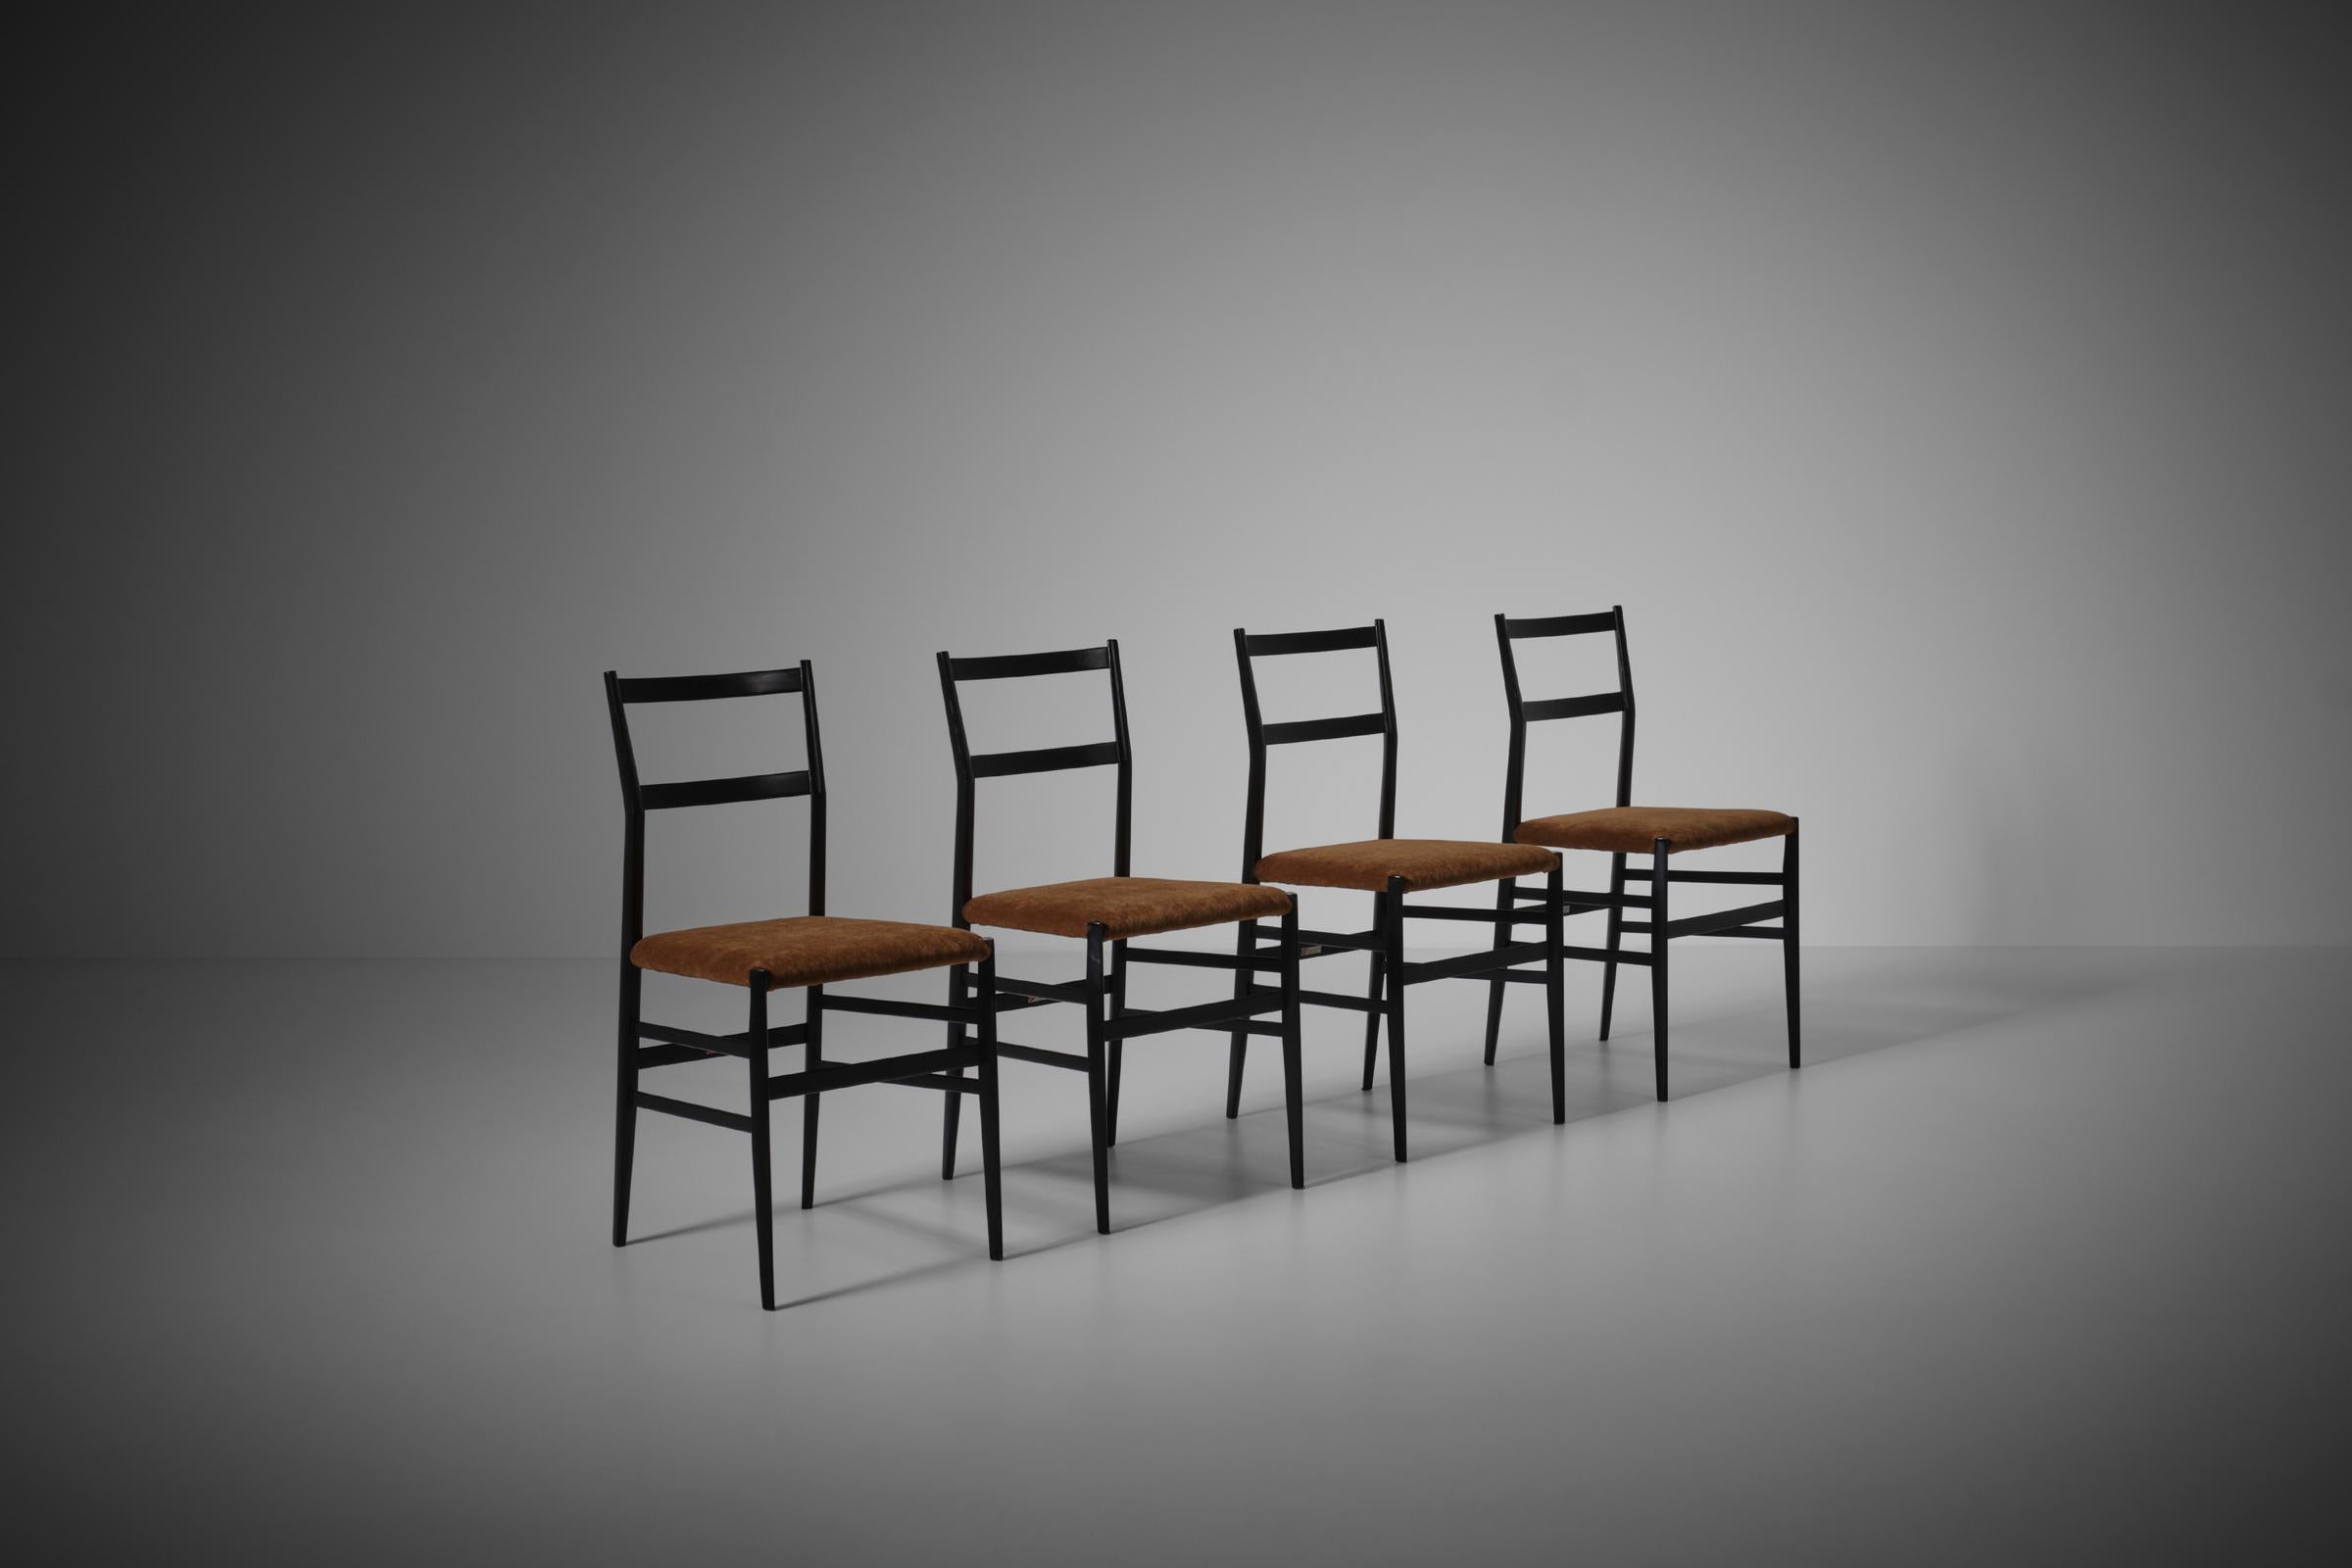 Set of four 'Superleggera' chairs by Gio Ponti for Cassina, Italy 1950s. Iconic design made in solid Ash and their original black lacquered finish and upholstered seat. The seat is reupholstered in a warm honey colored mohair velvet. Characteristic